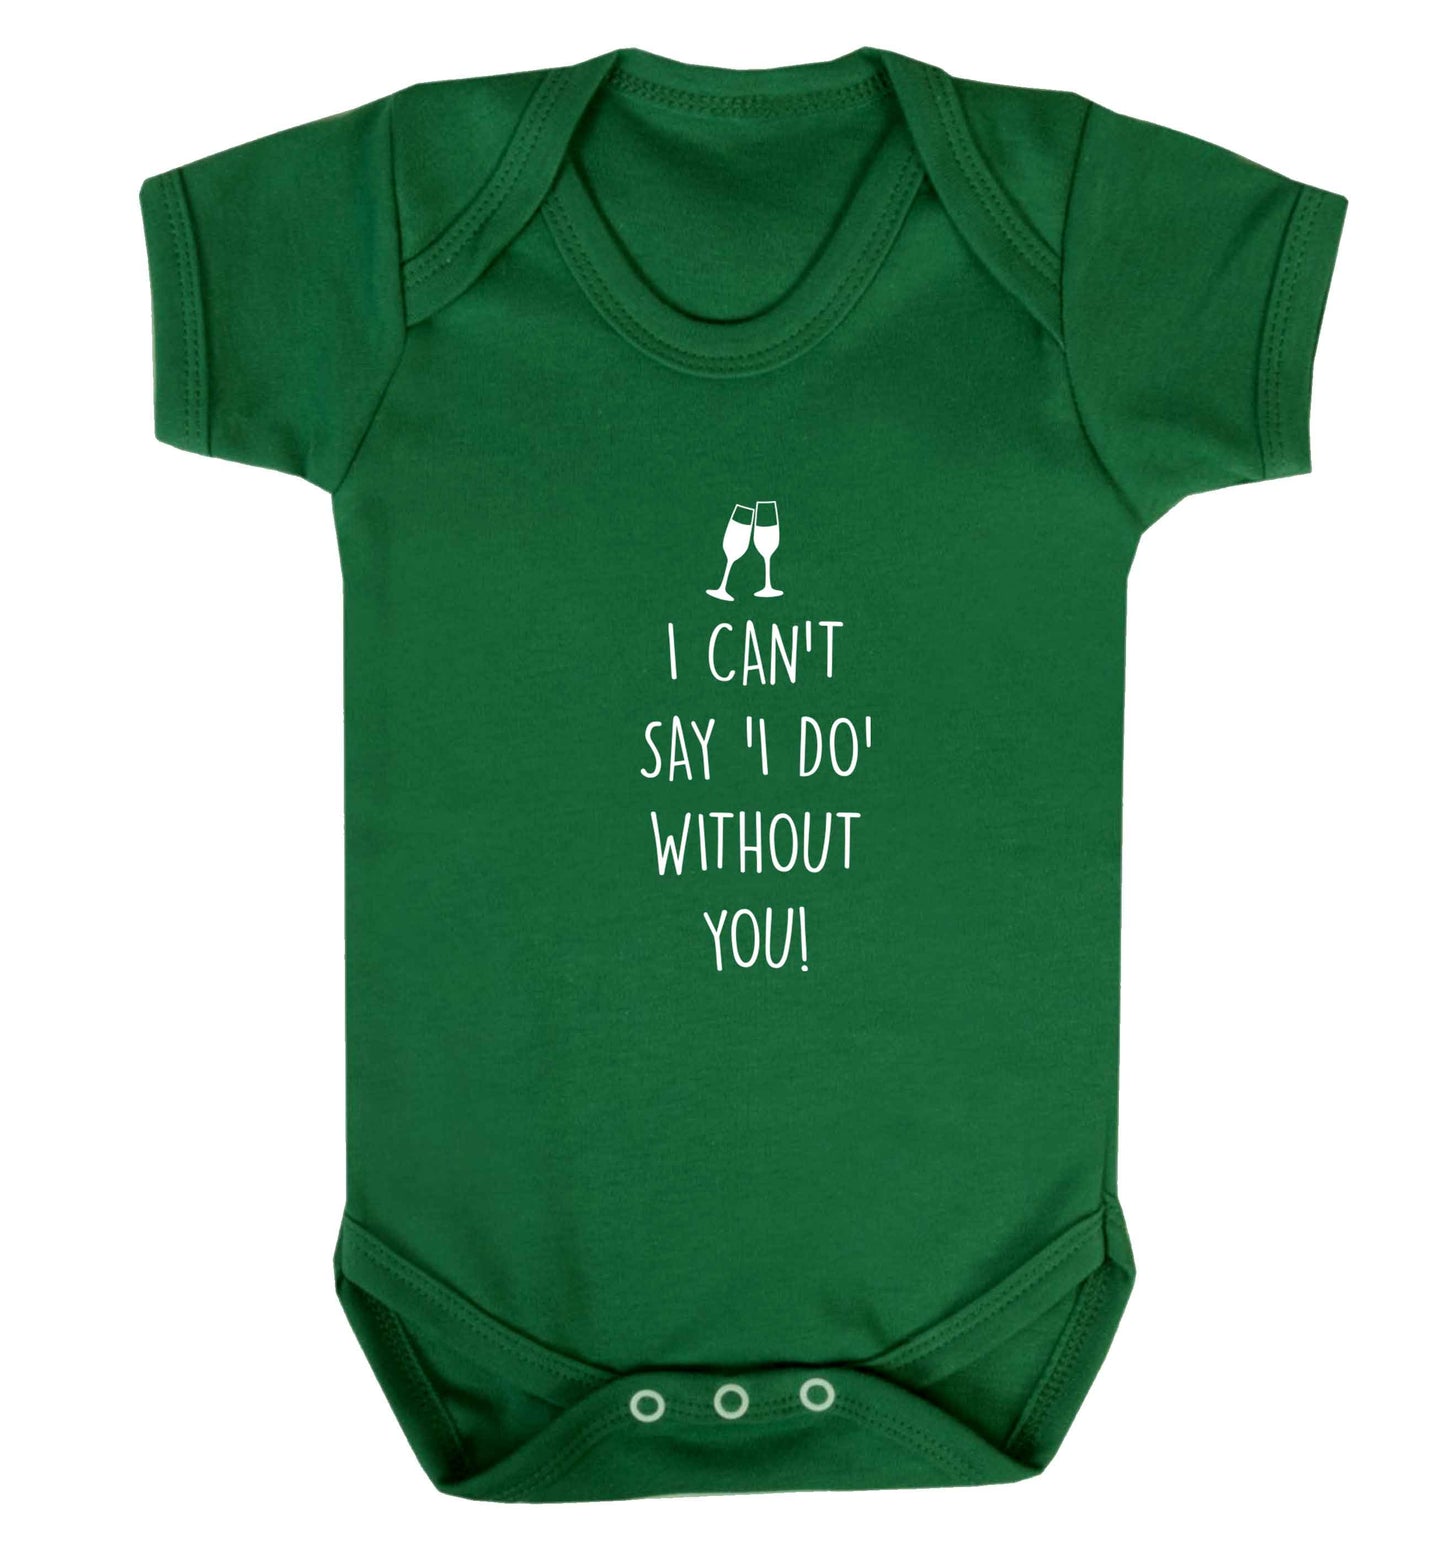 I can't say 'I do' without you! baby vest green 18-24 months